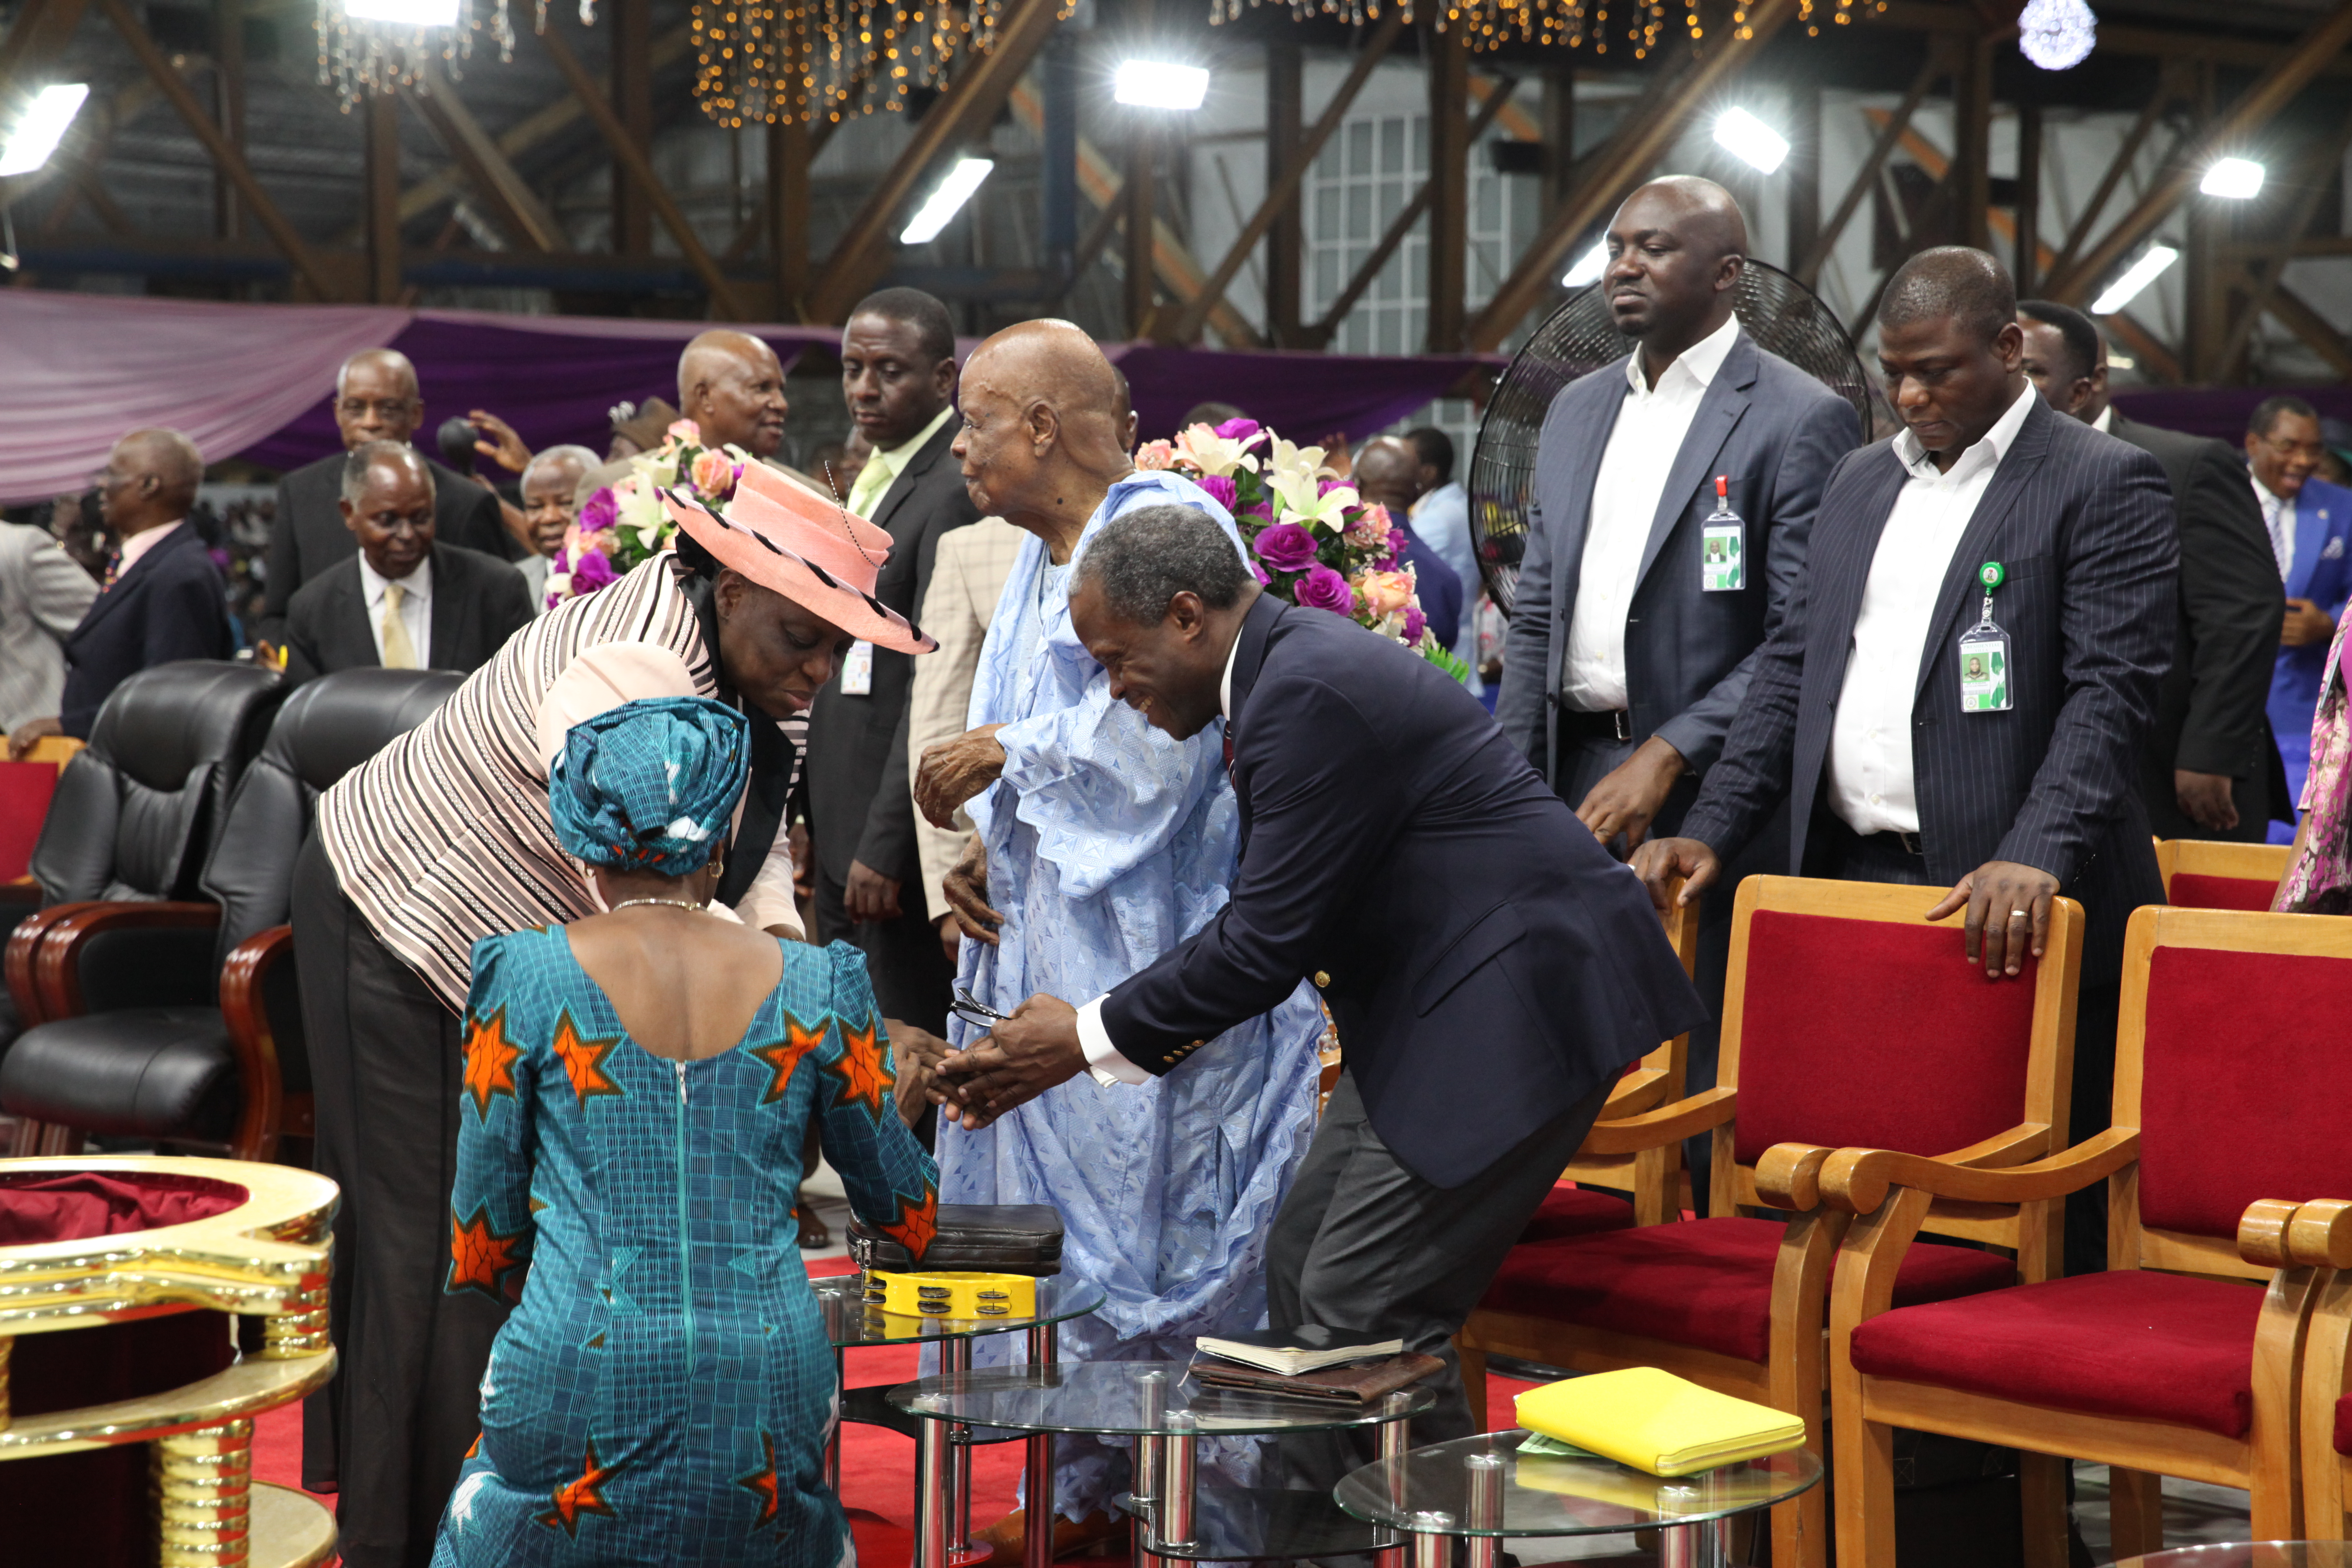 VP Osinbajo And Wife At RCCG Camp On 06/11/2015